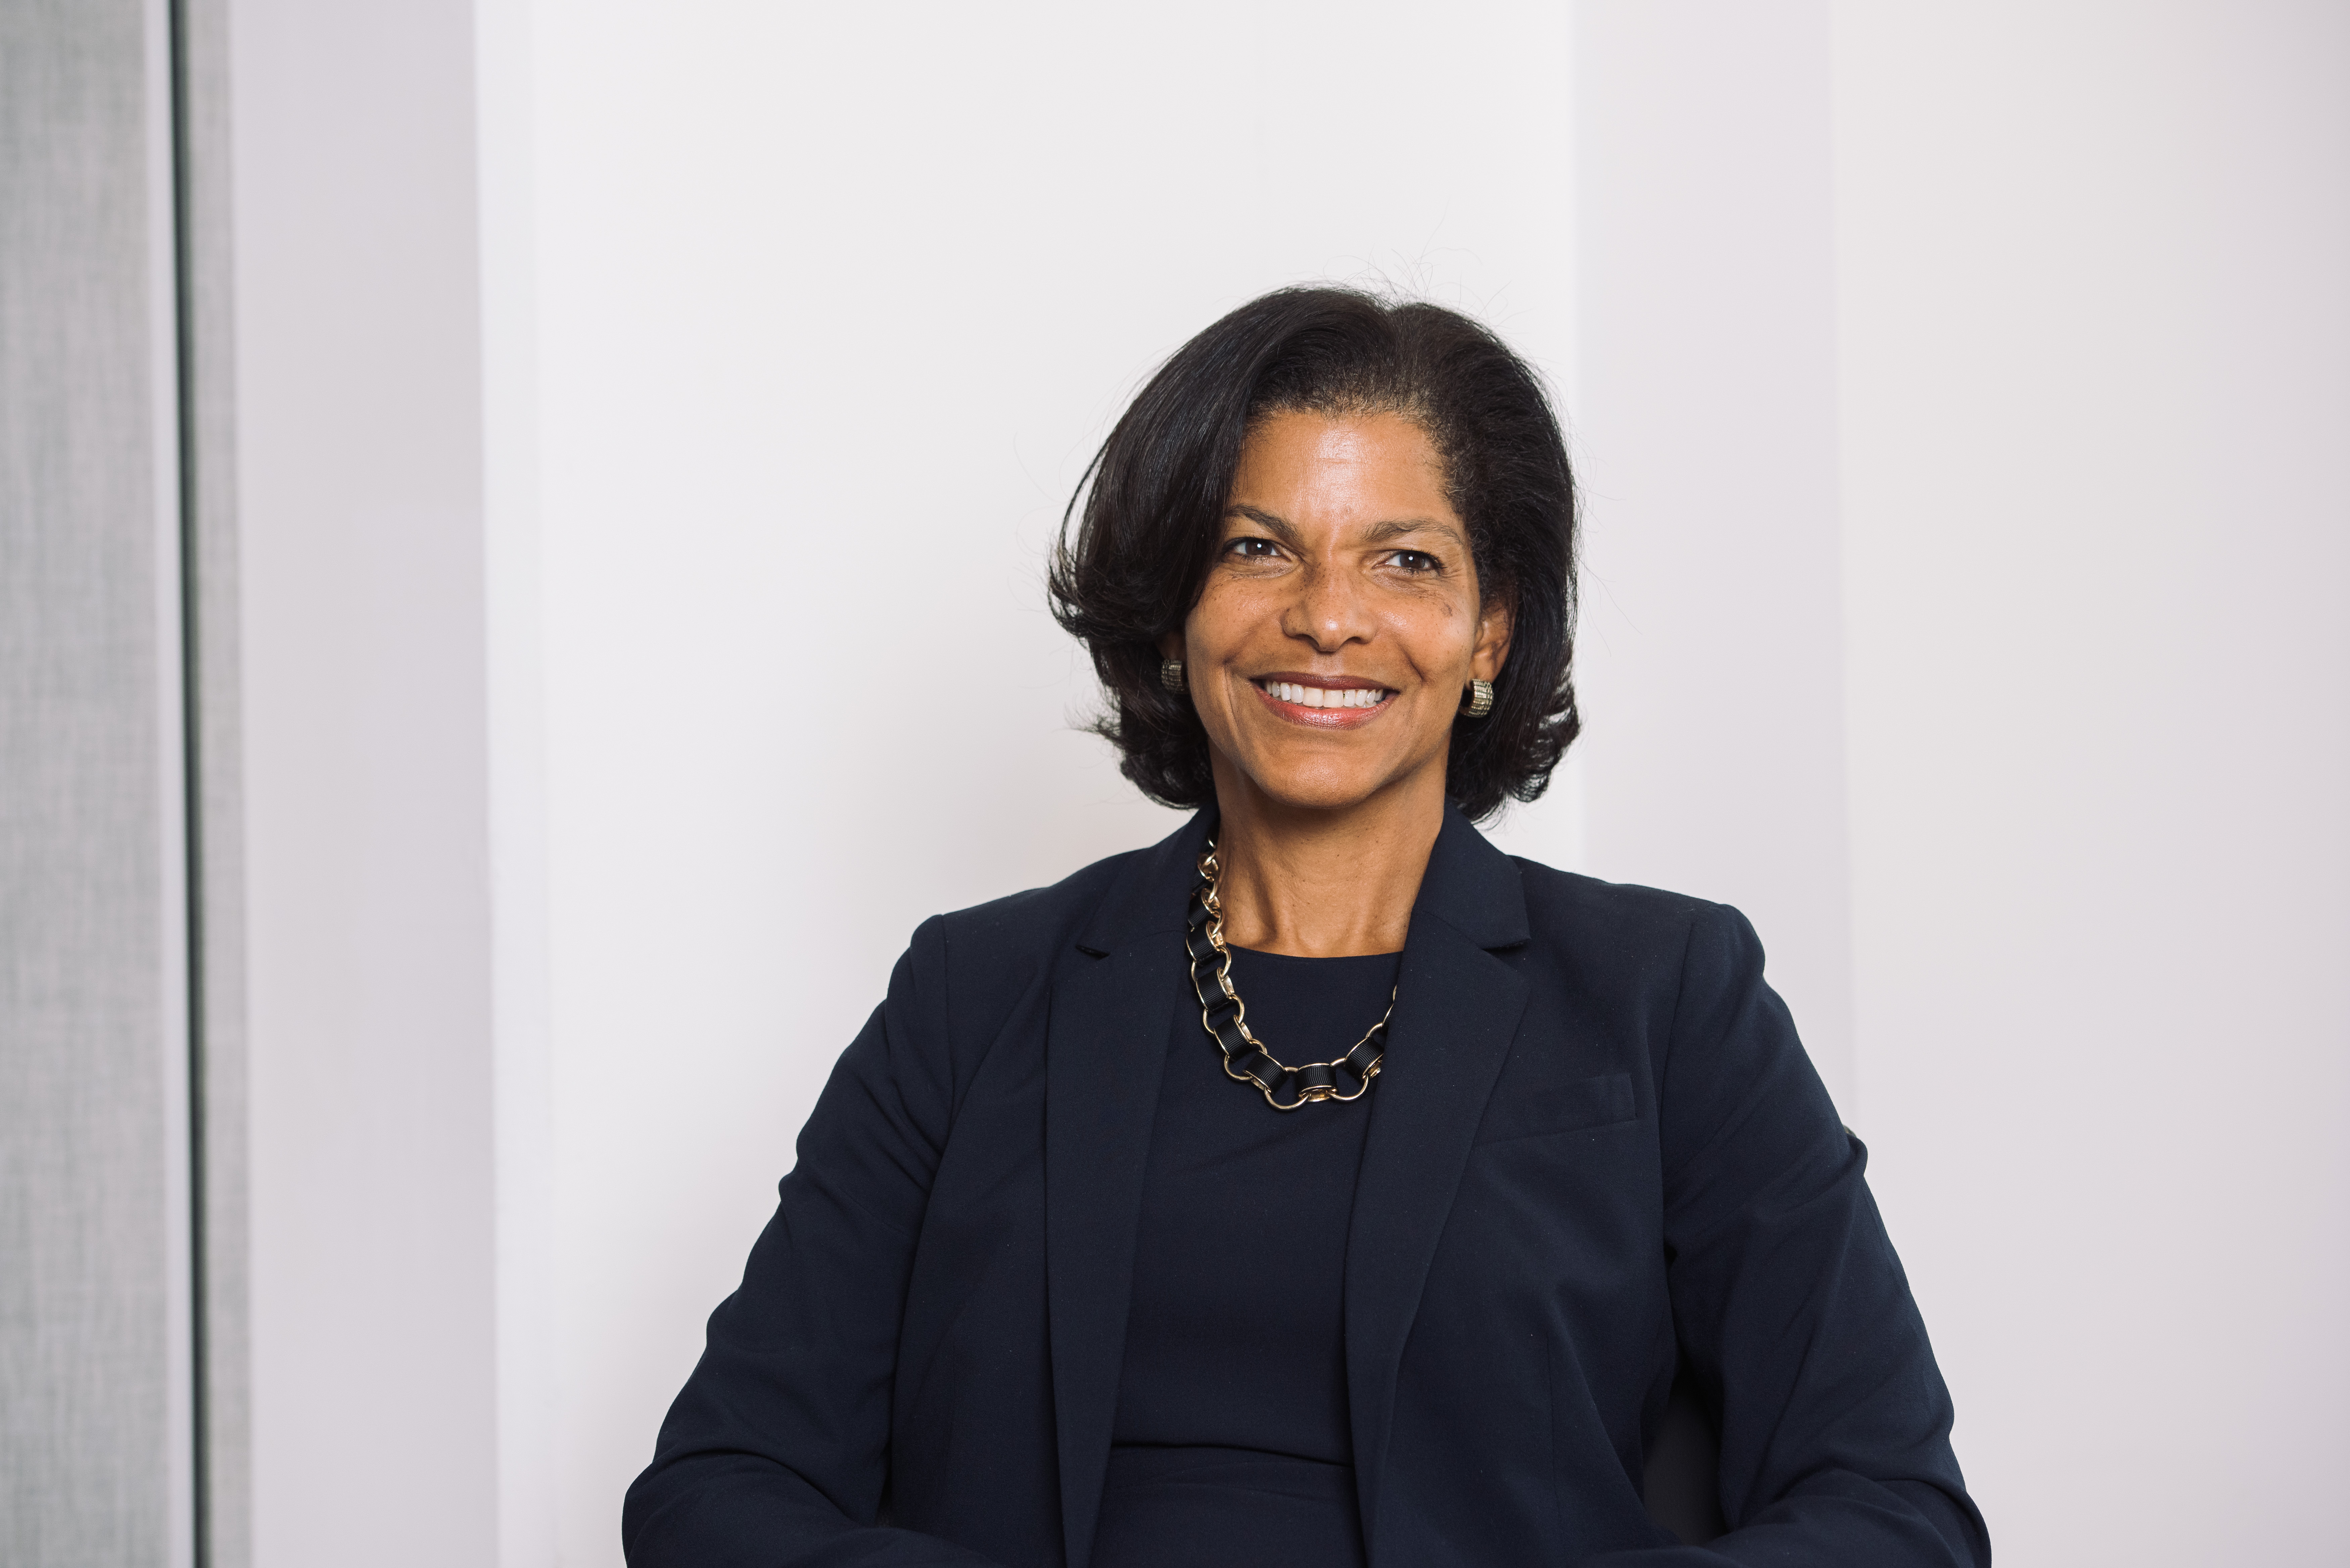 Kimberly A. Nelson Named to Board of Directors At Colgate